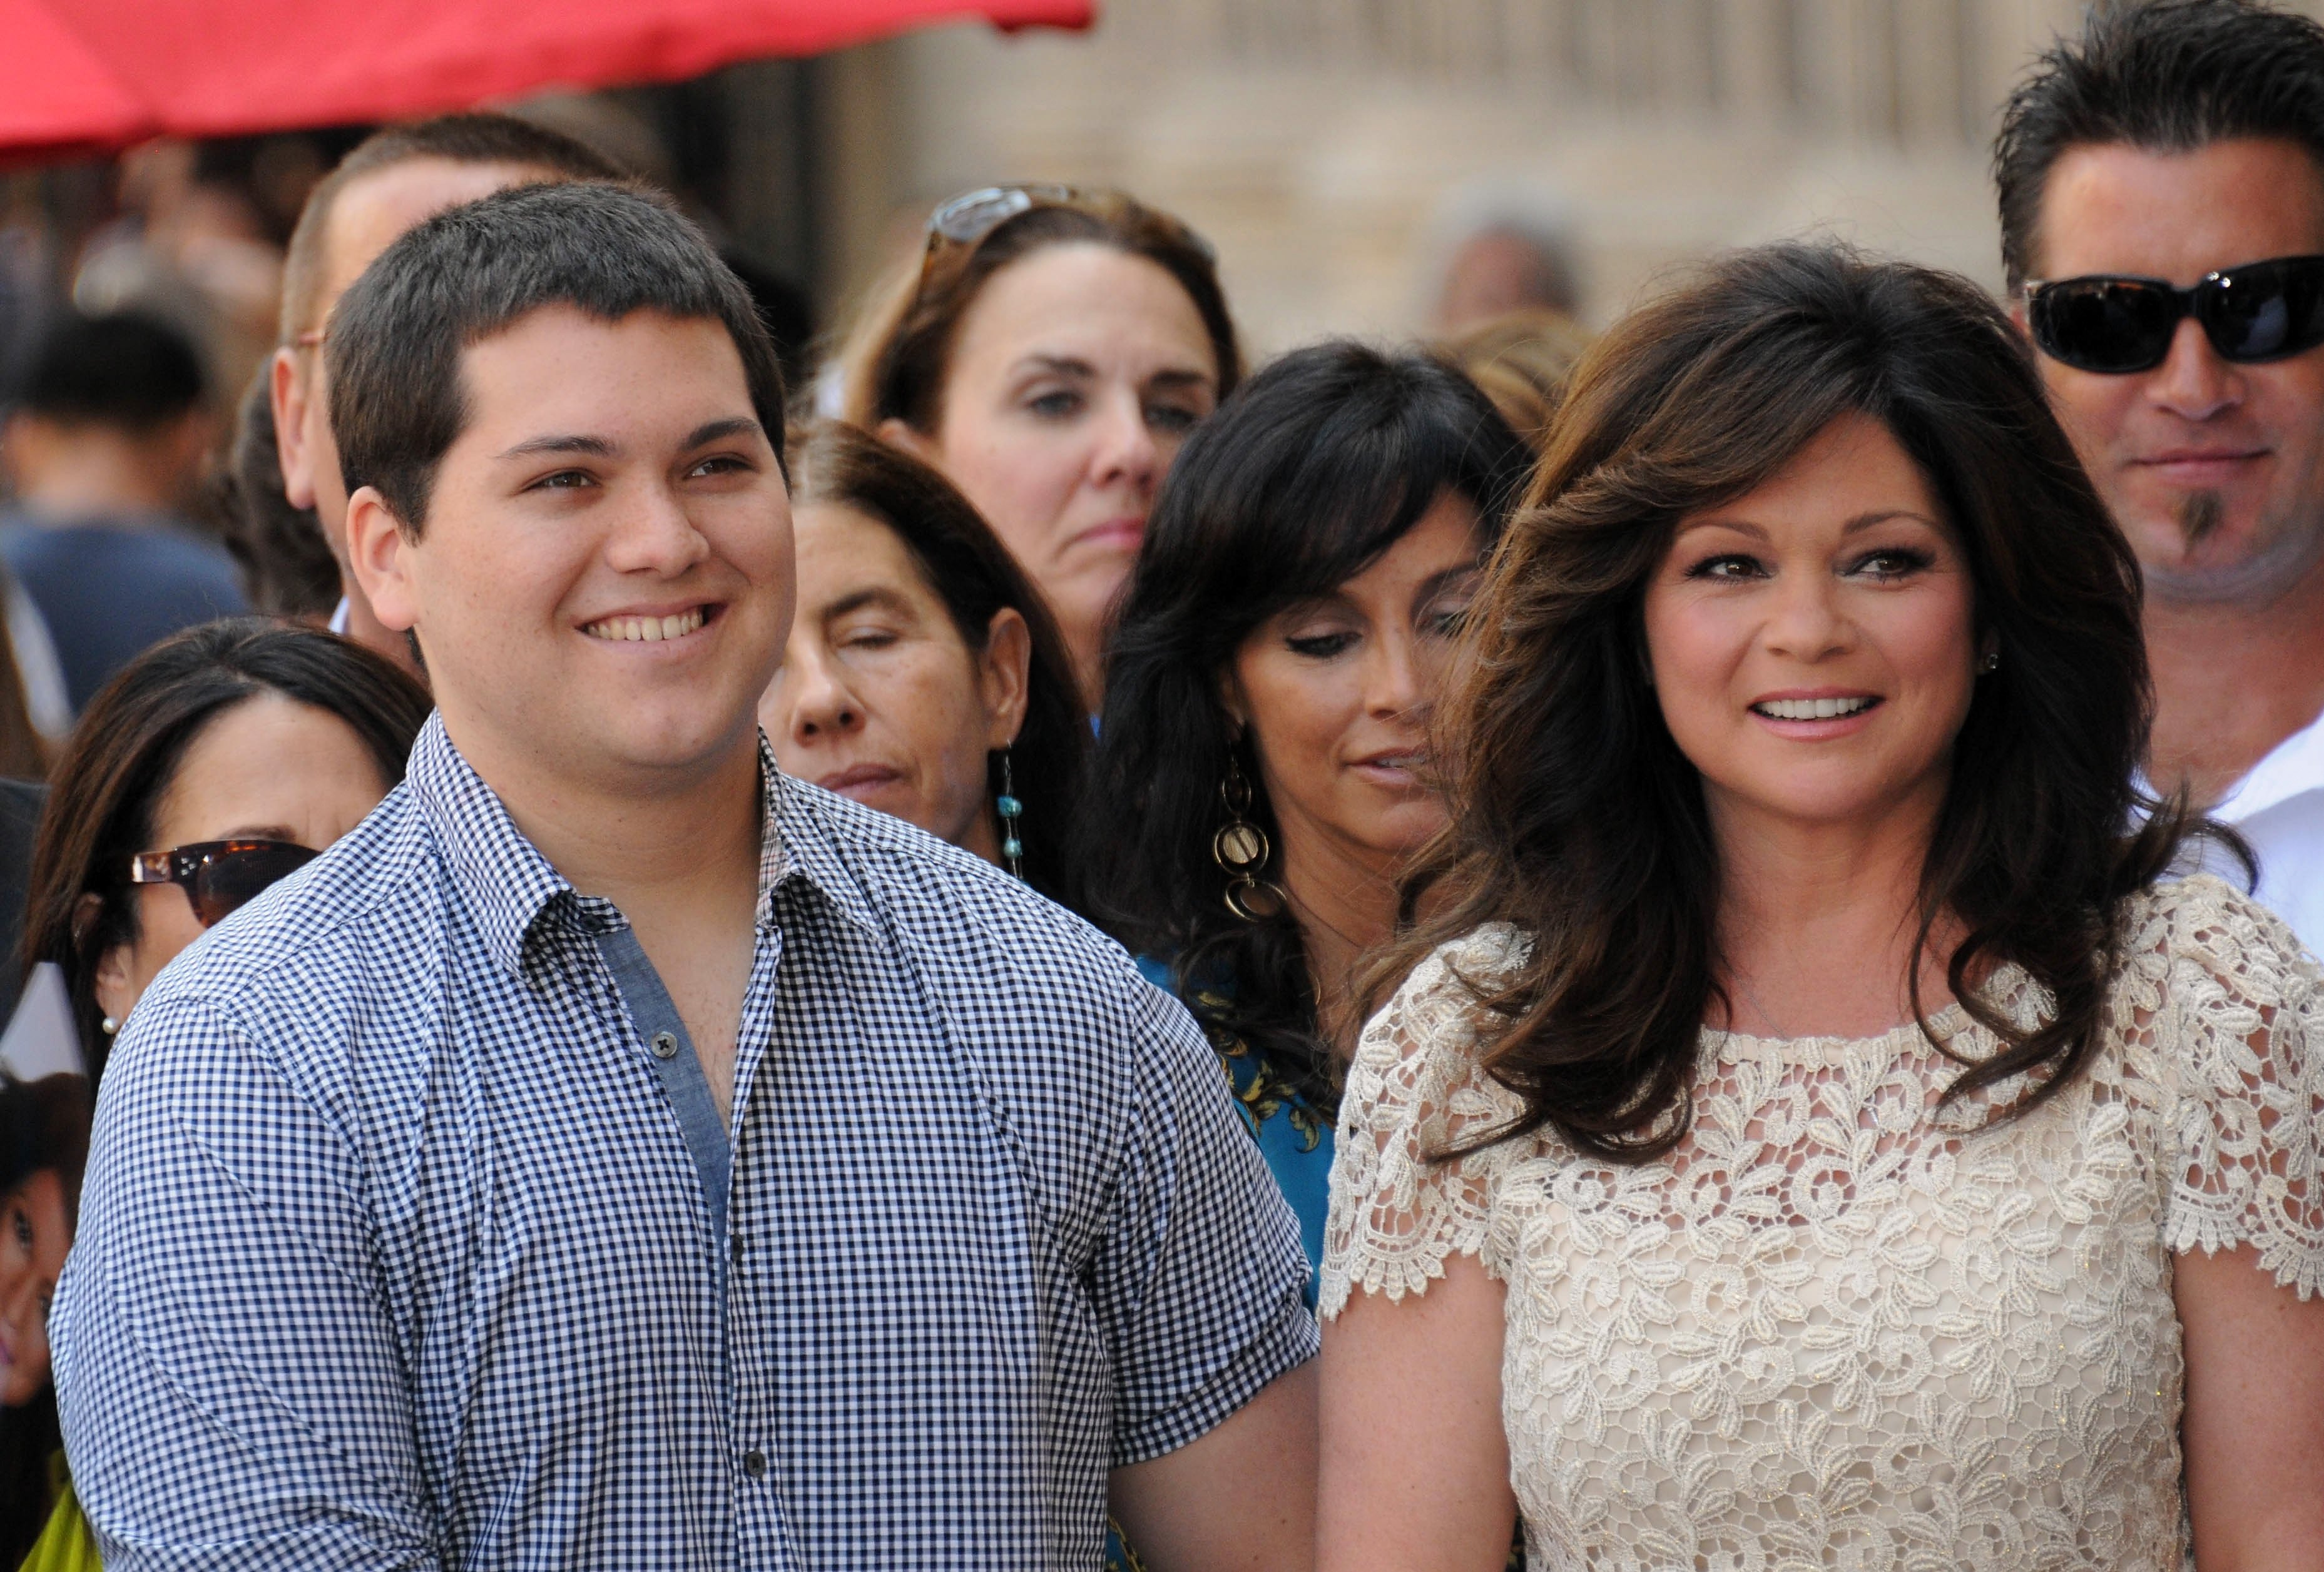 Valerie Bertinelli S Emotional Reunion With Her Son Wolfgang So Nice To Hug My Son Again